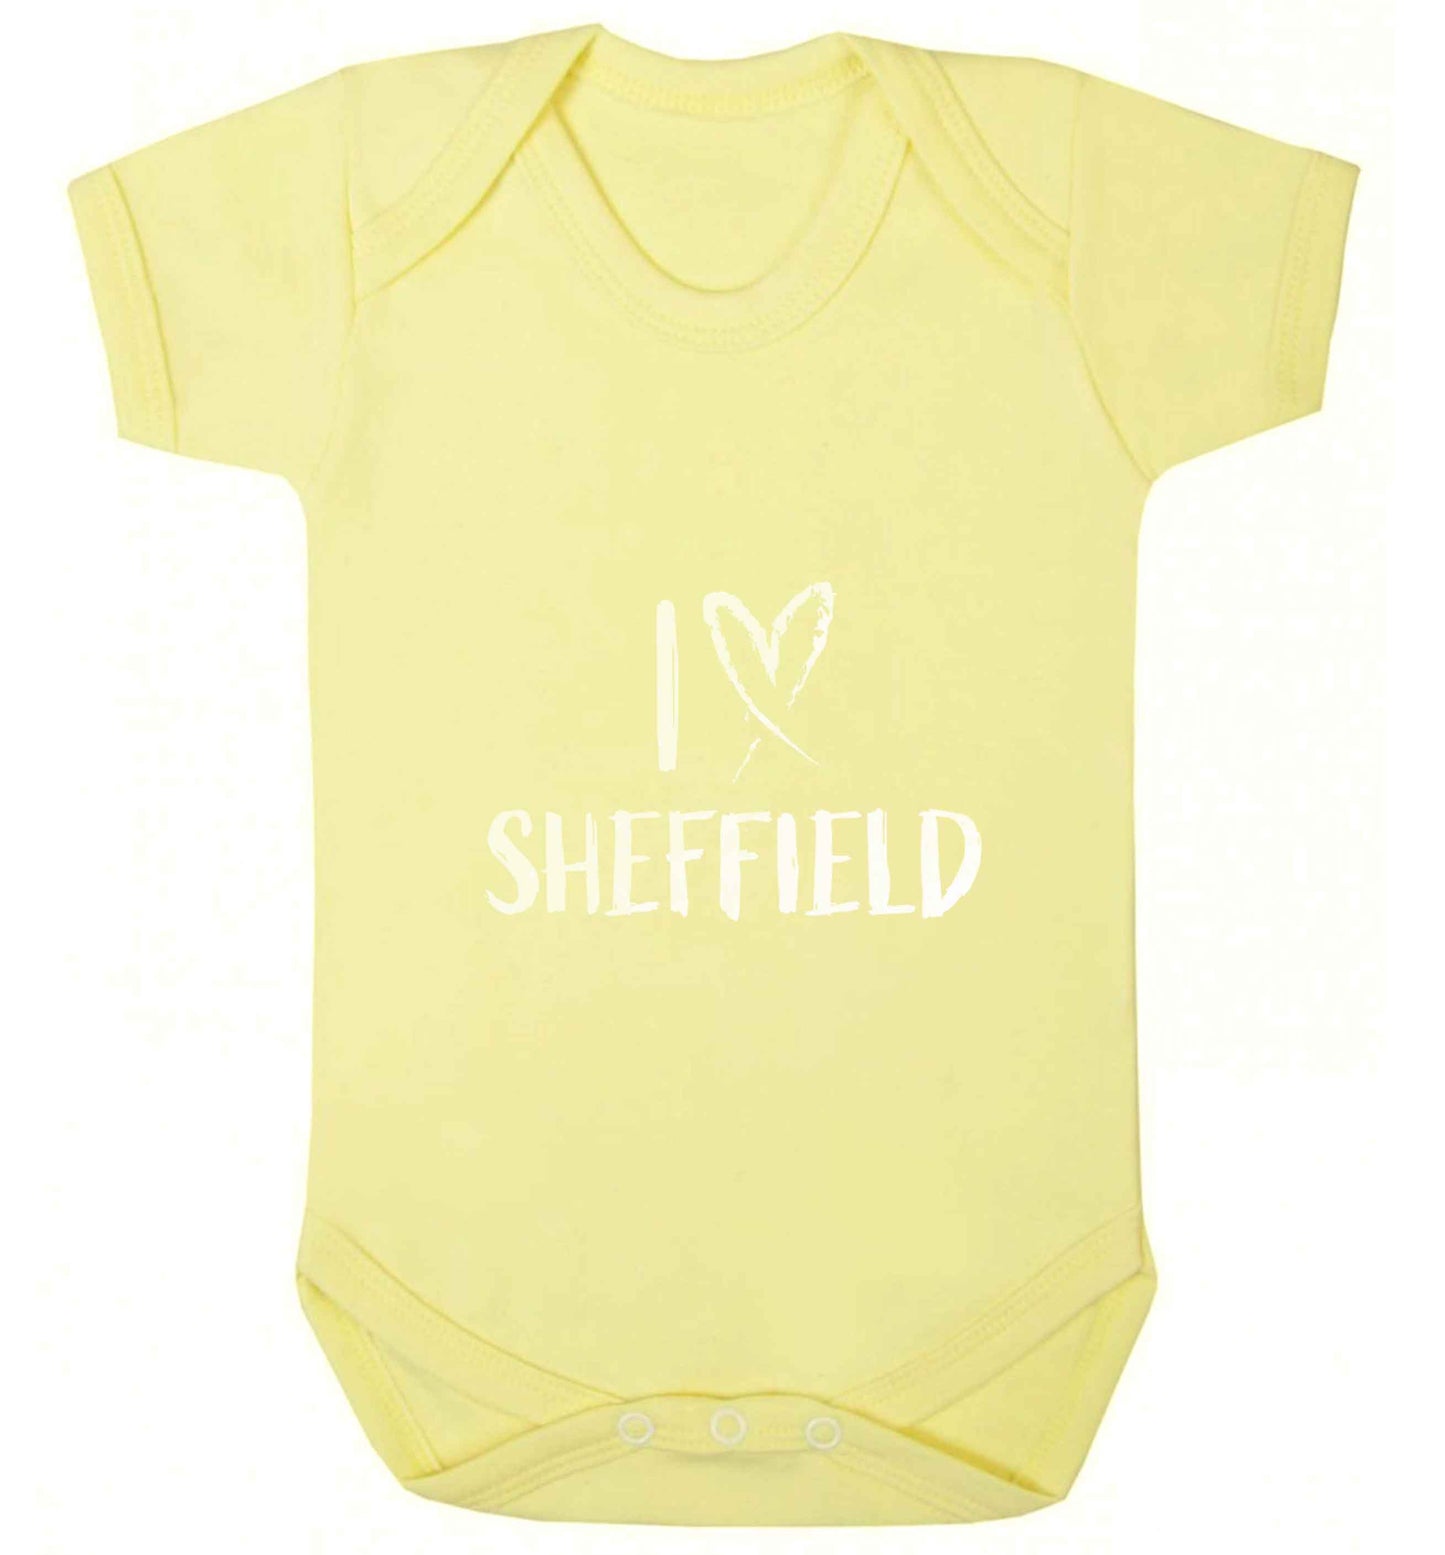 I love Sheffield baby vest pale yellow 18-24 months